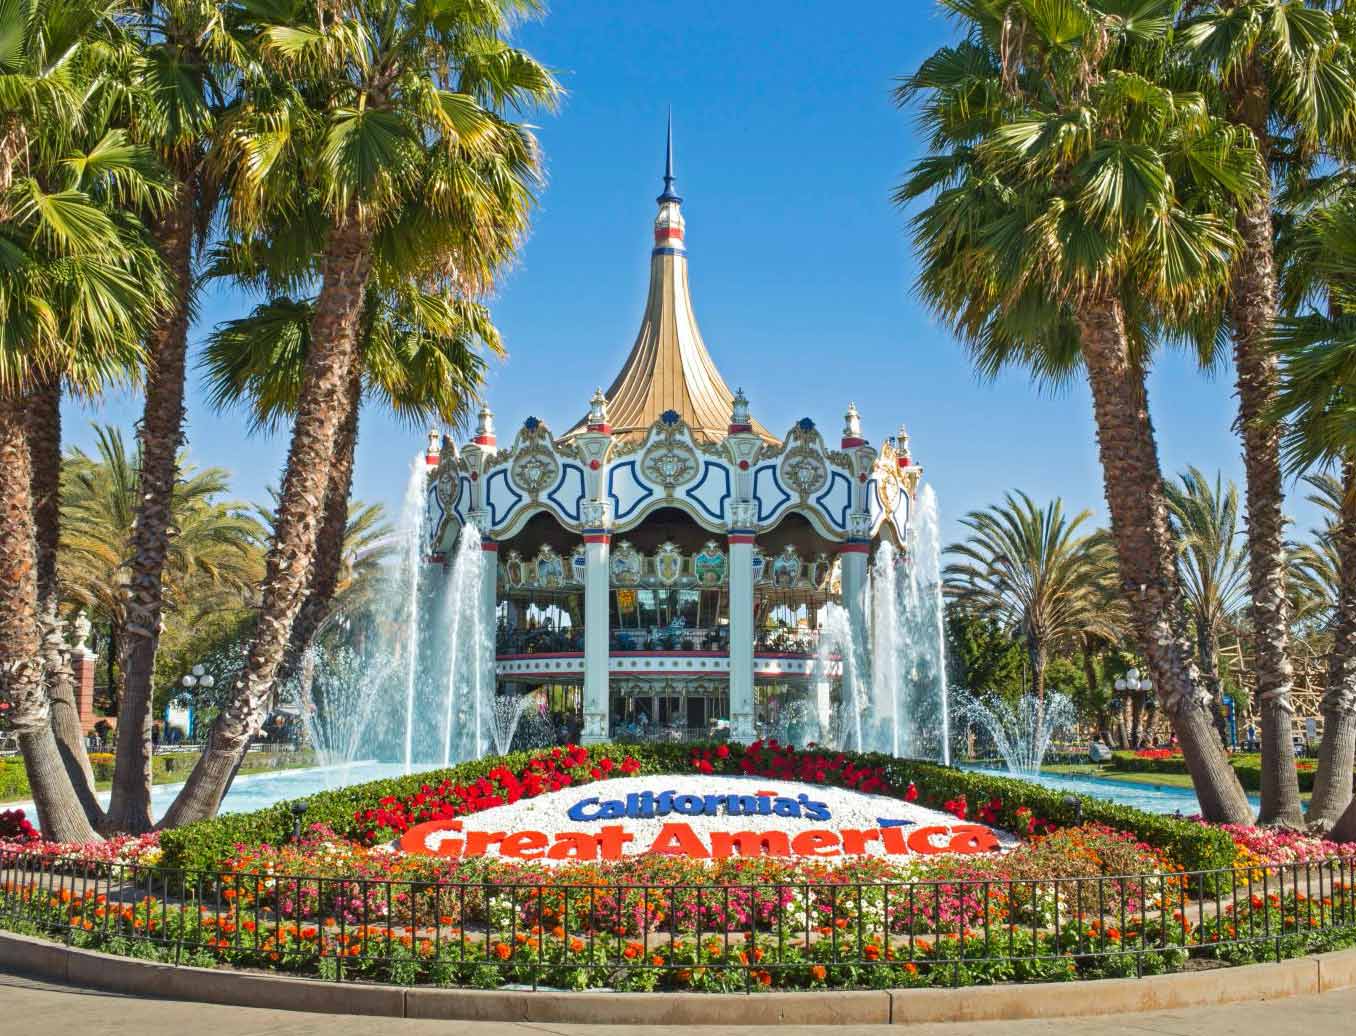 It Doesn't Look Like California's Great America Is Closing Anytime Soon ...